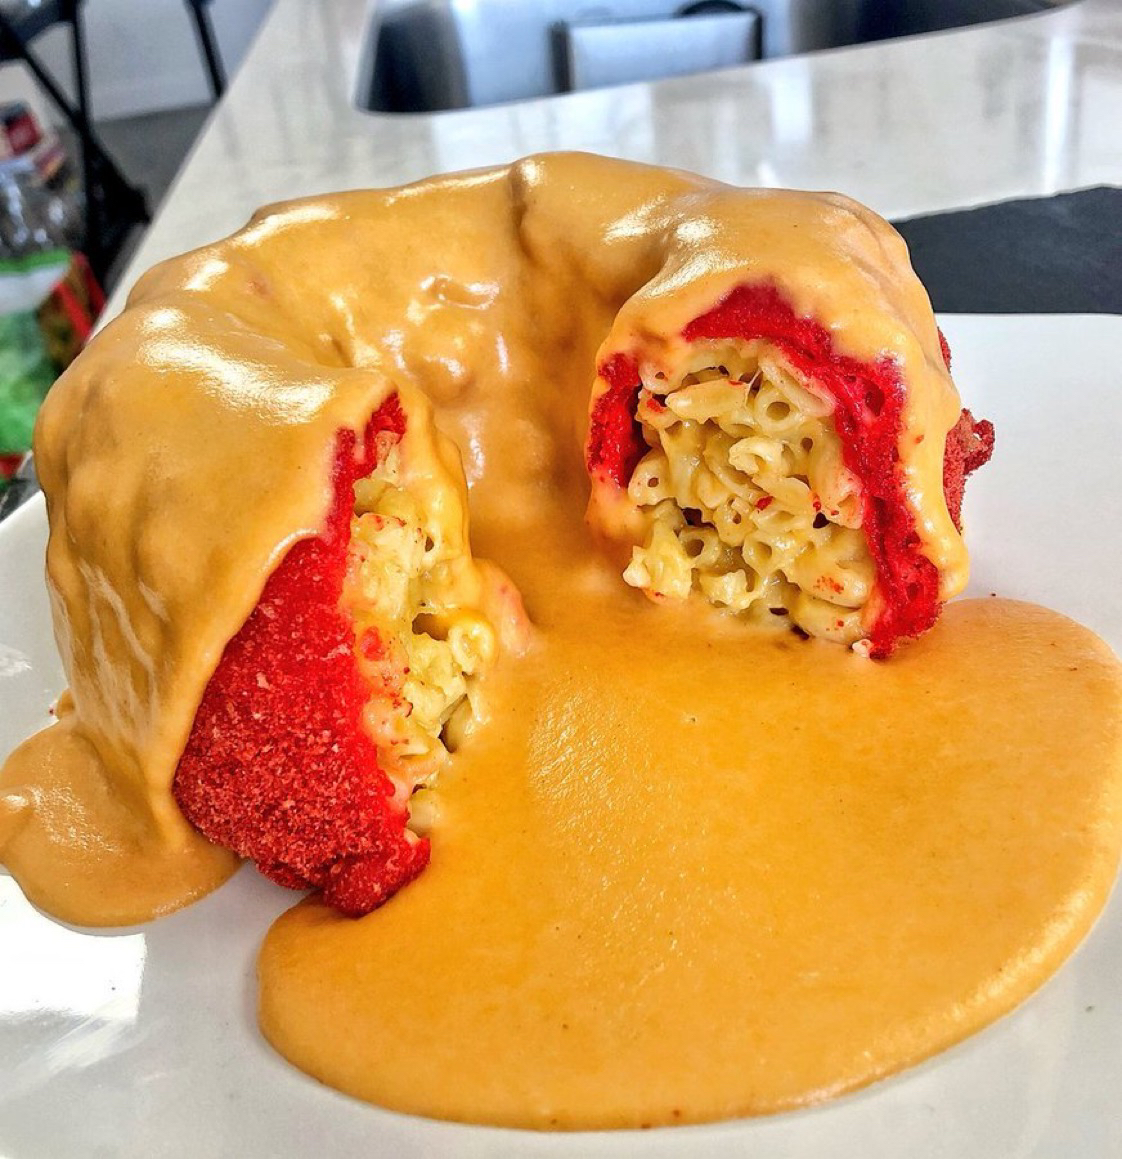 hot cheeto and cheese bundt cake vs. waffles and pasta sauce